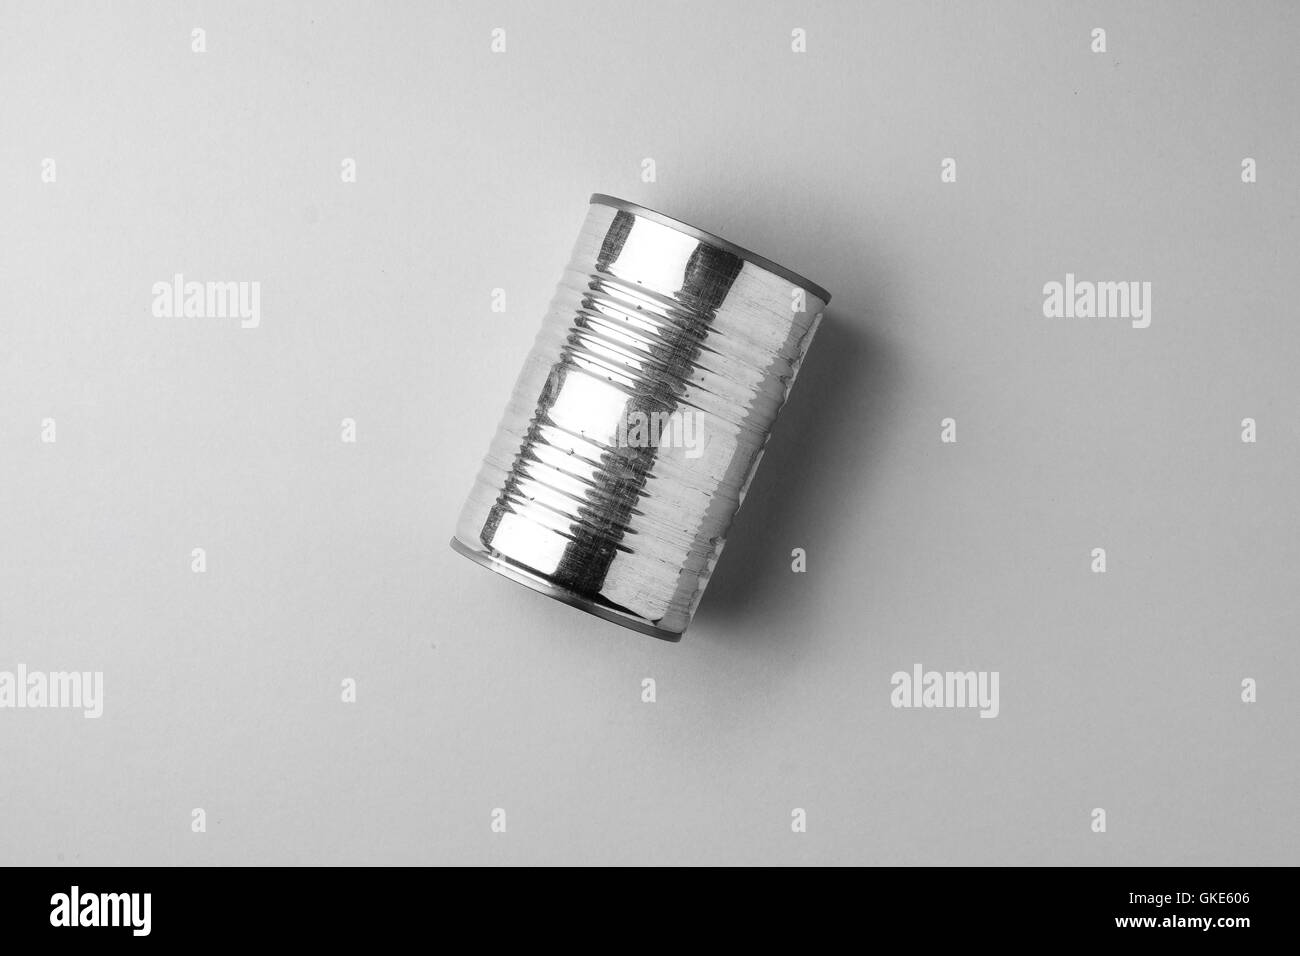 Canned food viewed from above Stock Photo